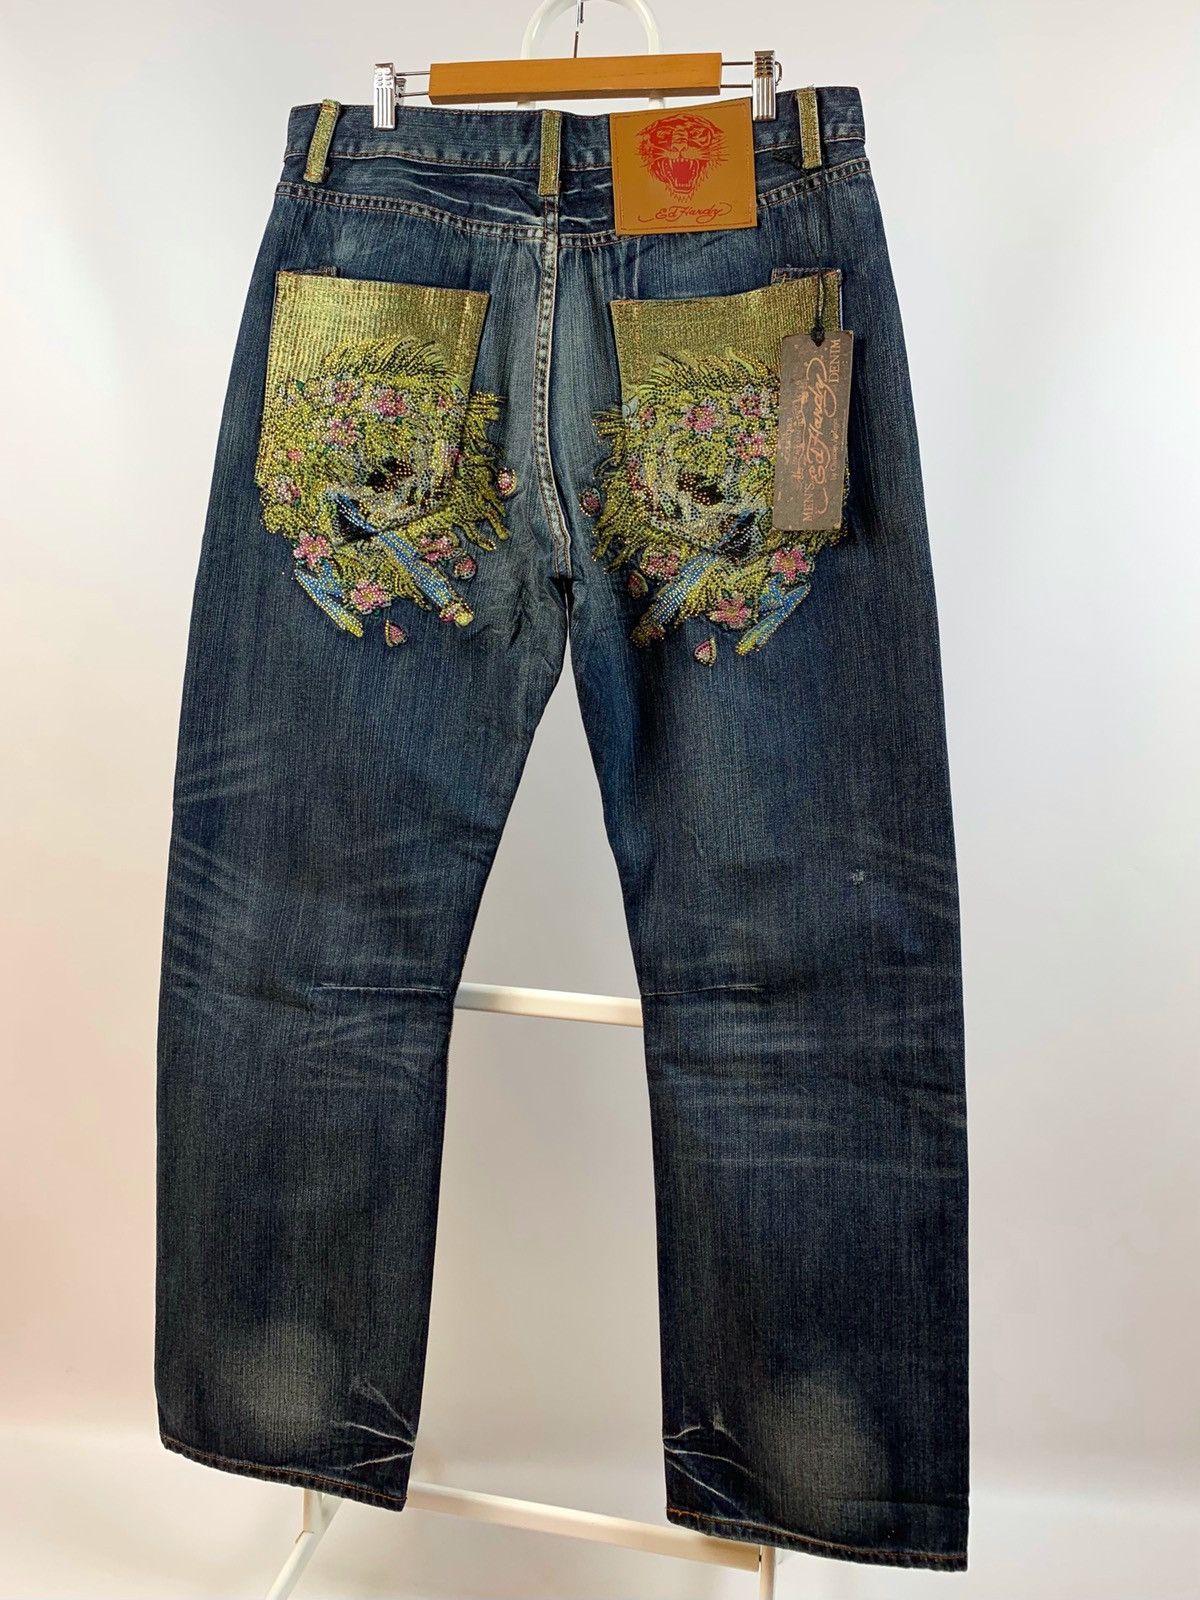 Pre-owned Christian Audigier X Ed Hardy Nwt Ed Hardy Christian Audigier Brilliant Skull Denim Pants In Blue